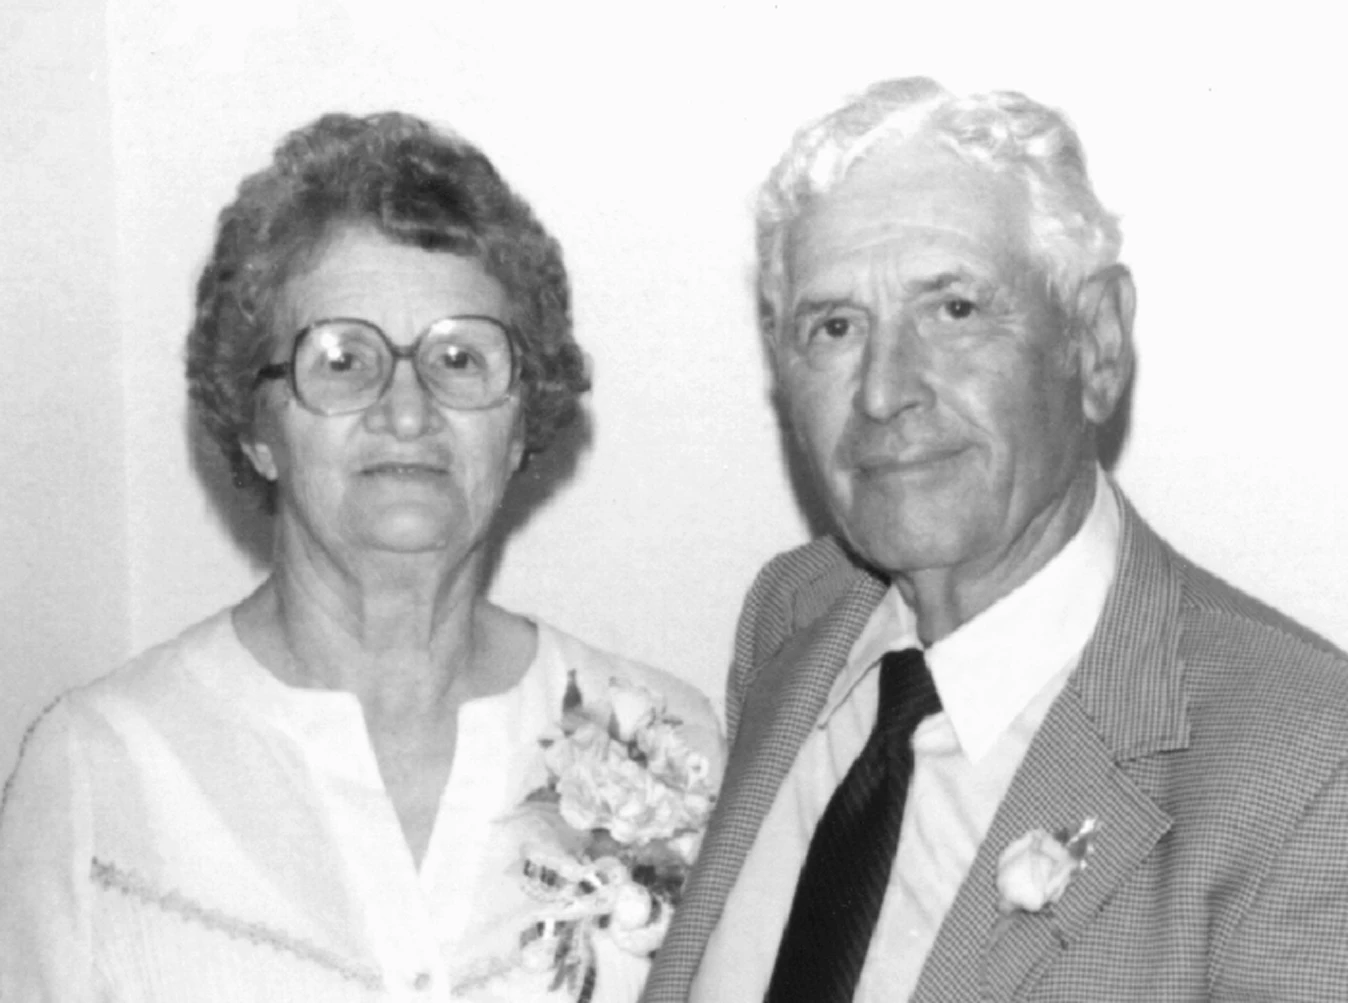 A female with short hair and glasses, smiles as she stands next to her husband